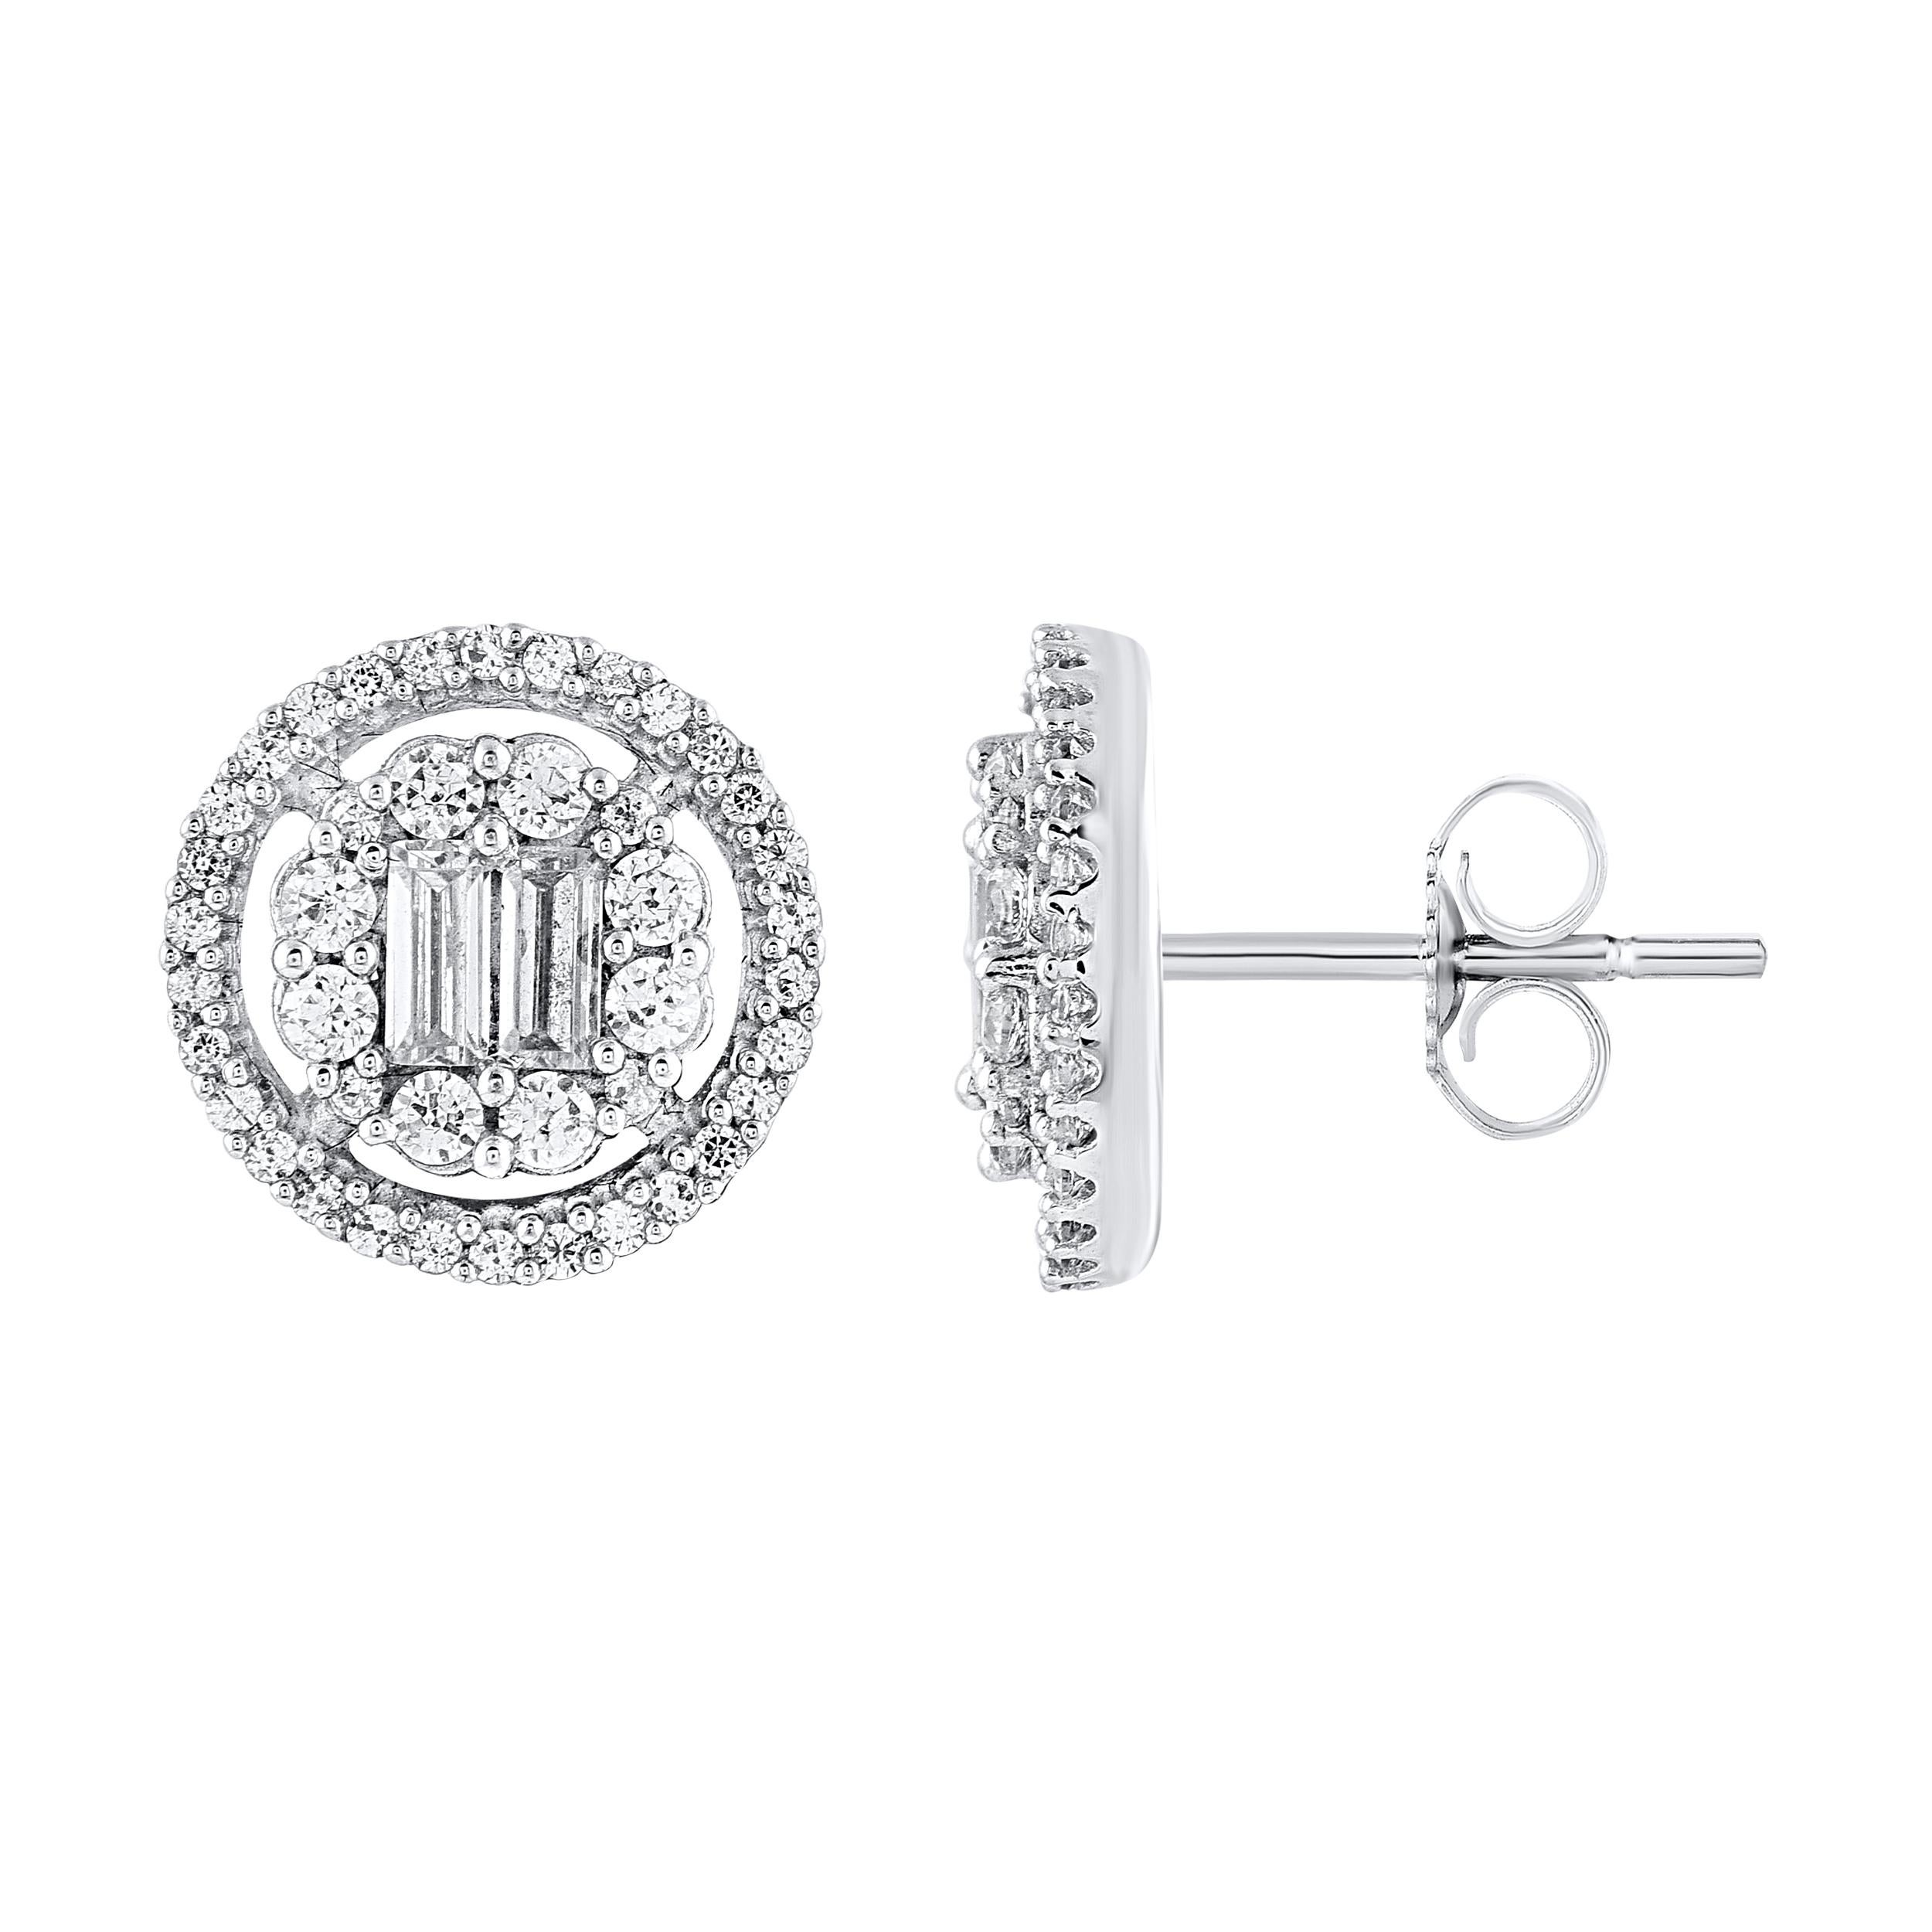 Timeless and elegant, these diamond stud earring are a style you'll wear with every look in your wardrobe. This earring is beautifully designed and studded with 88 natural round diamond and baguette diamond set in prong setting. We only use natural,